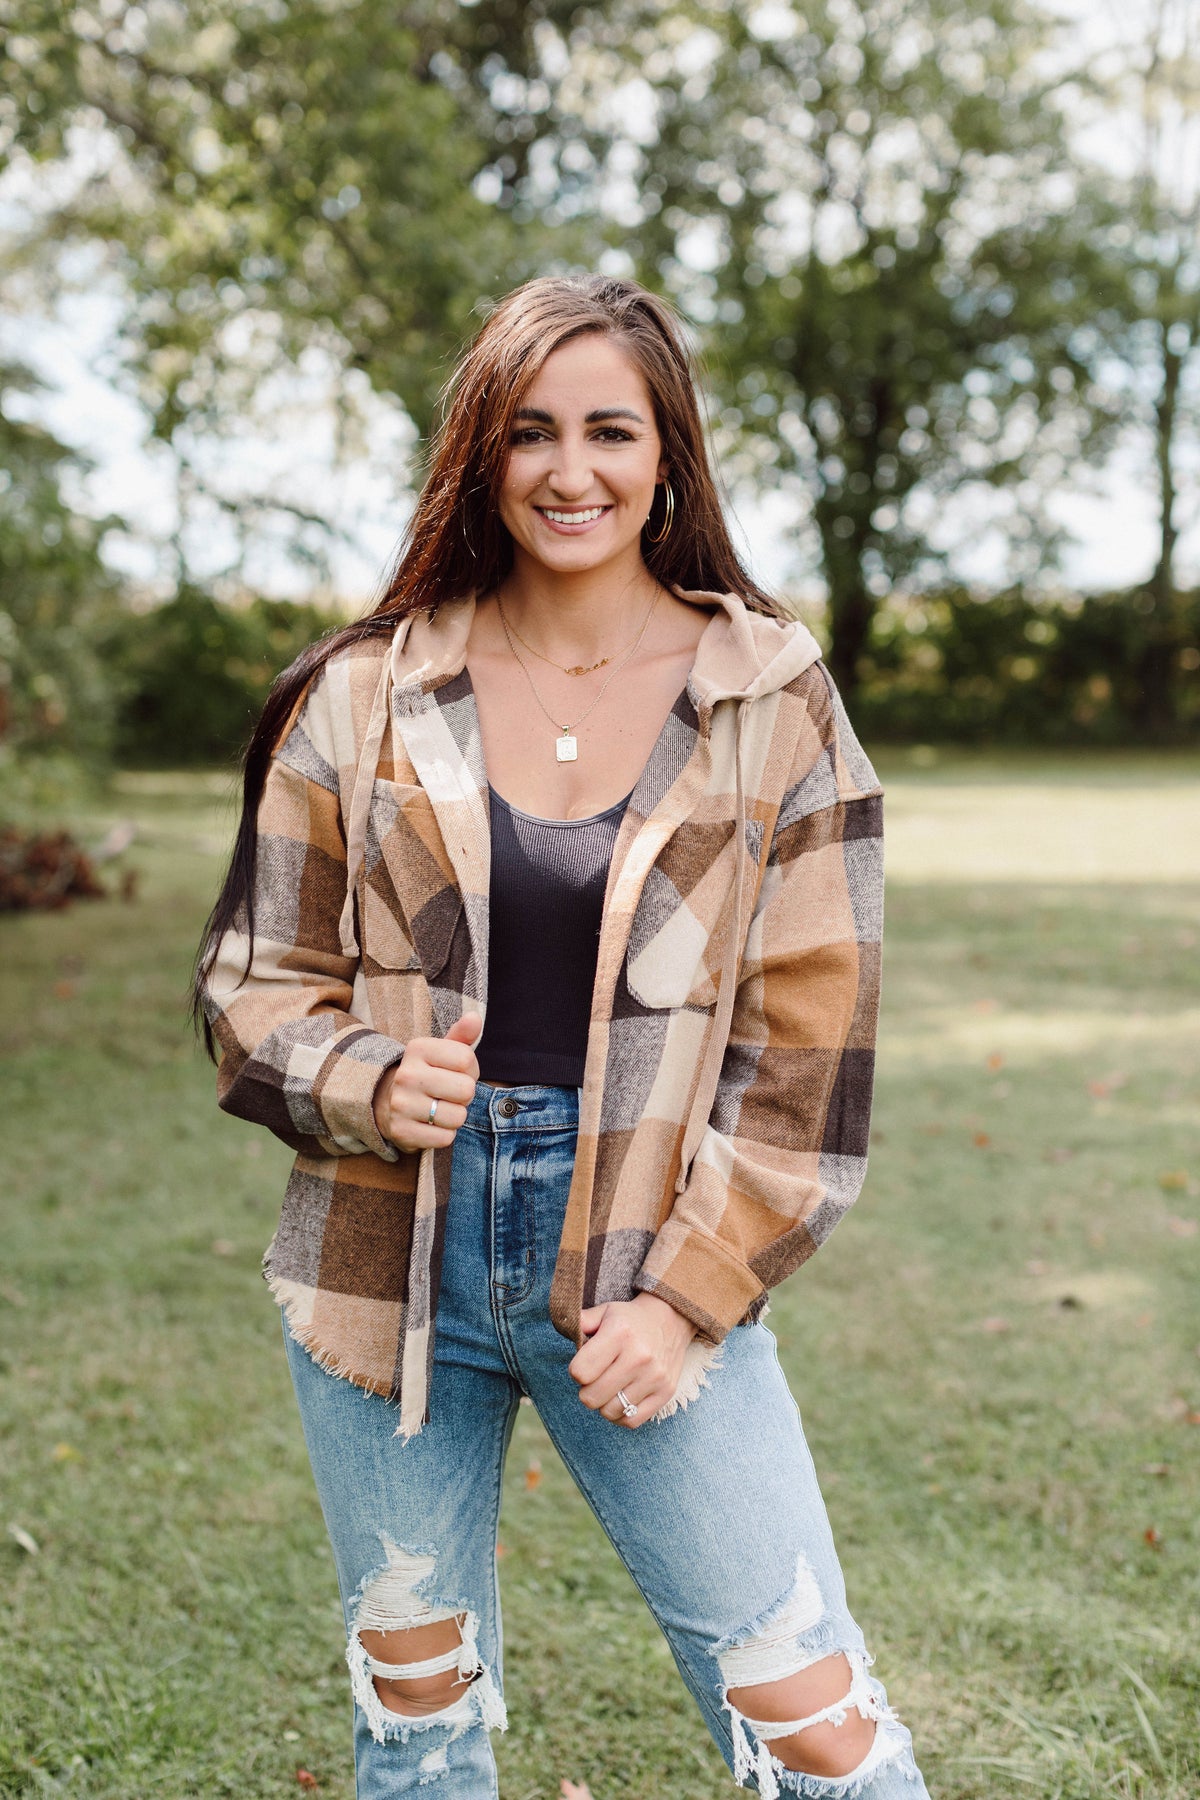 Finding You- Cream Hooded Flannel